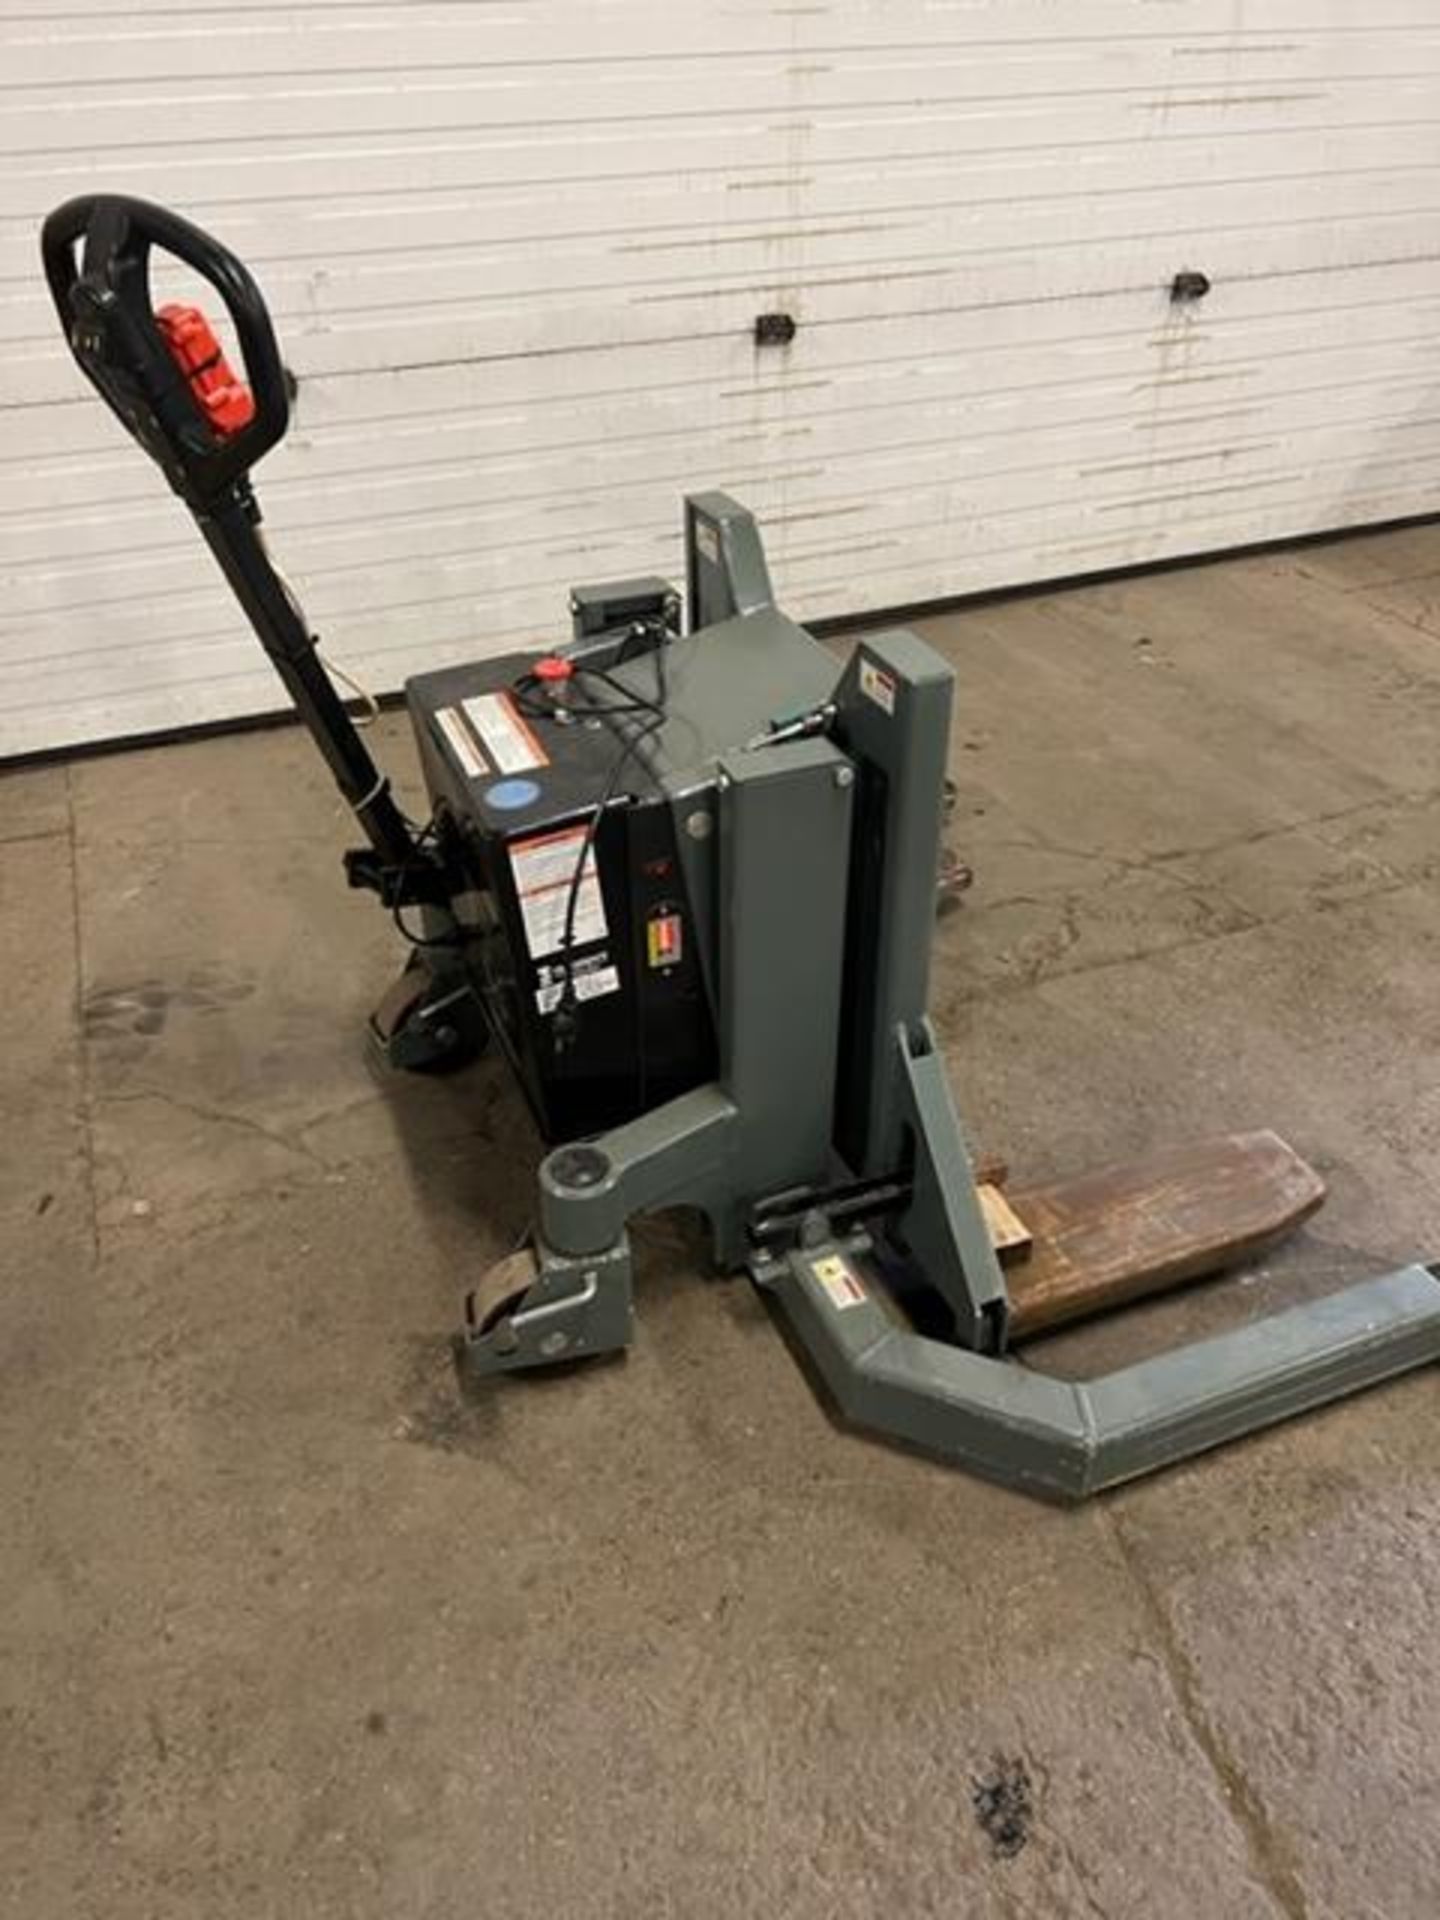 Tradesafe 800lbs Electric Pump Truck / Hydraulic Pallet Jack - NICE UNIT - Image 3 of 3